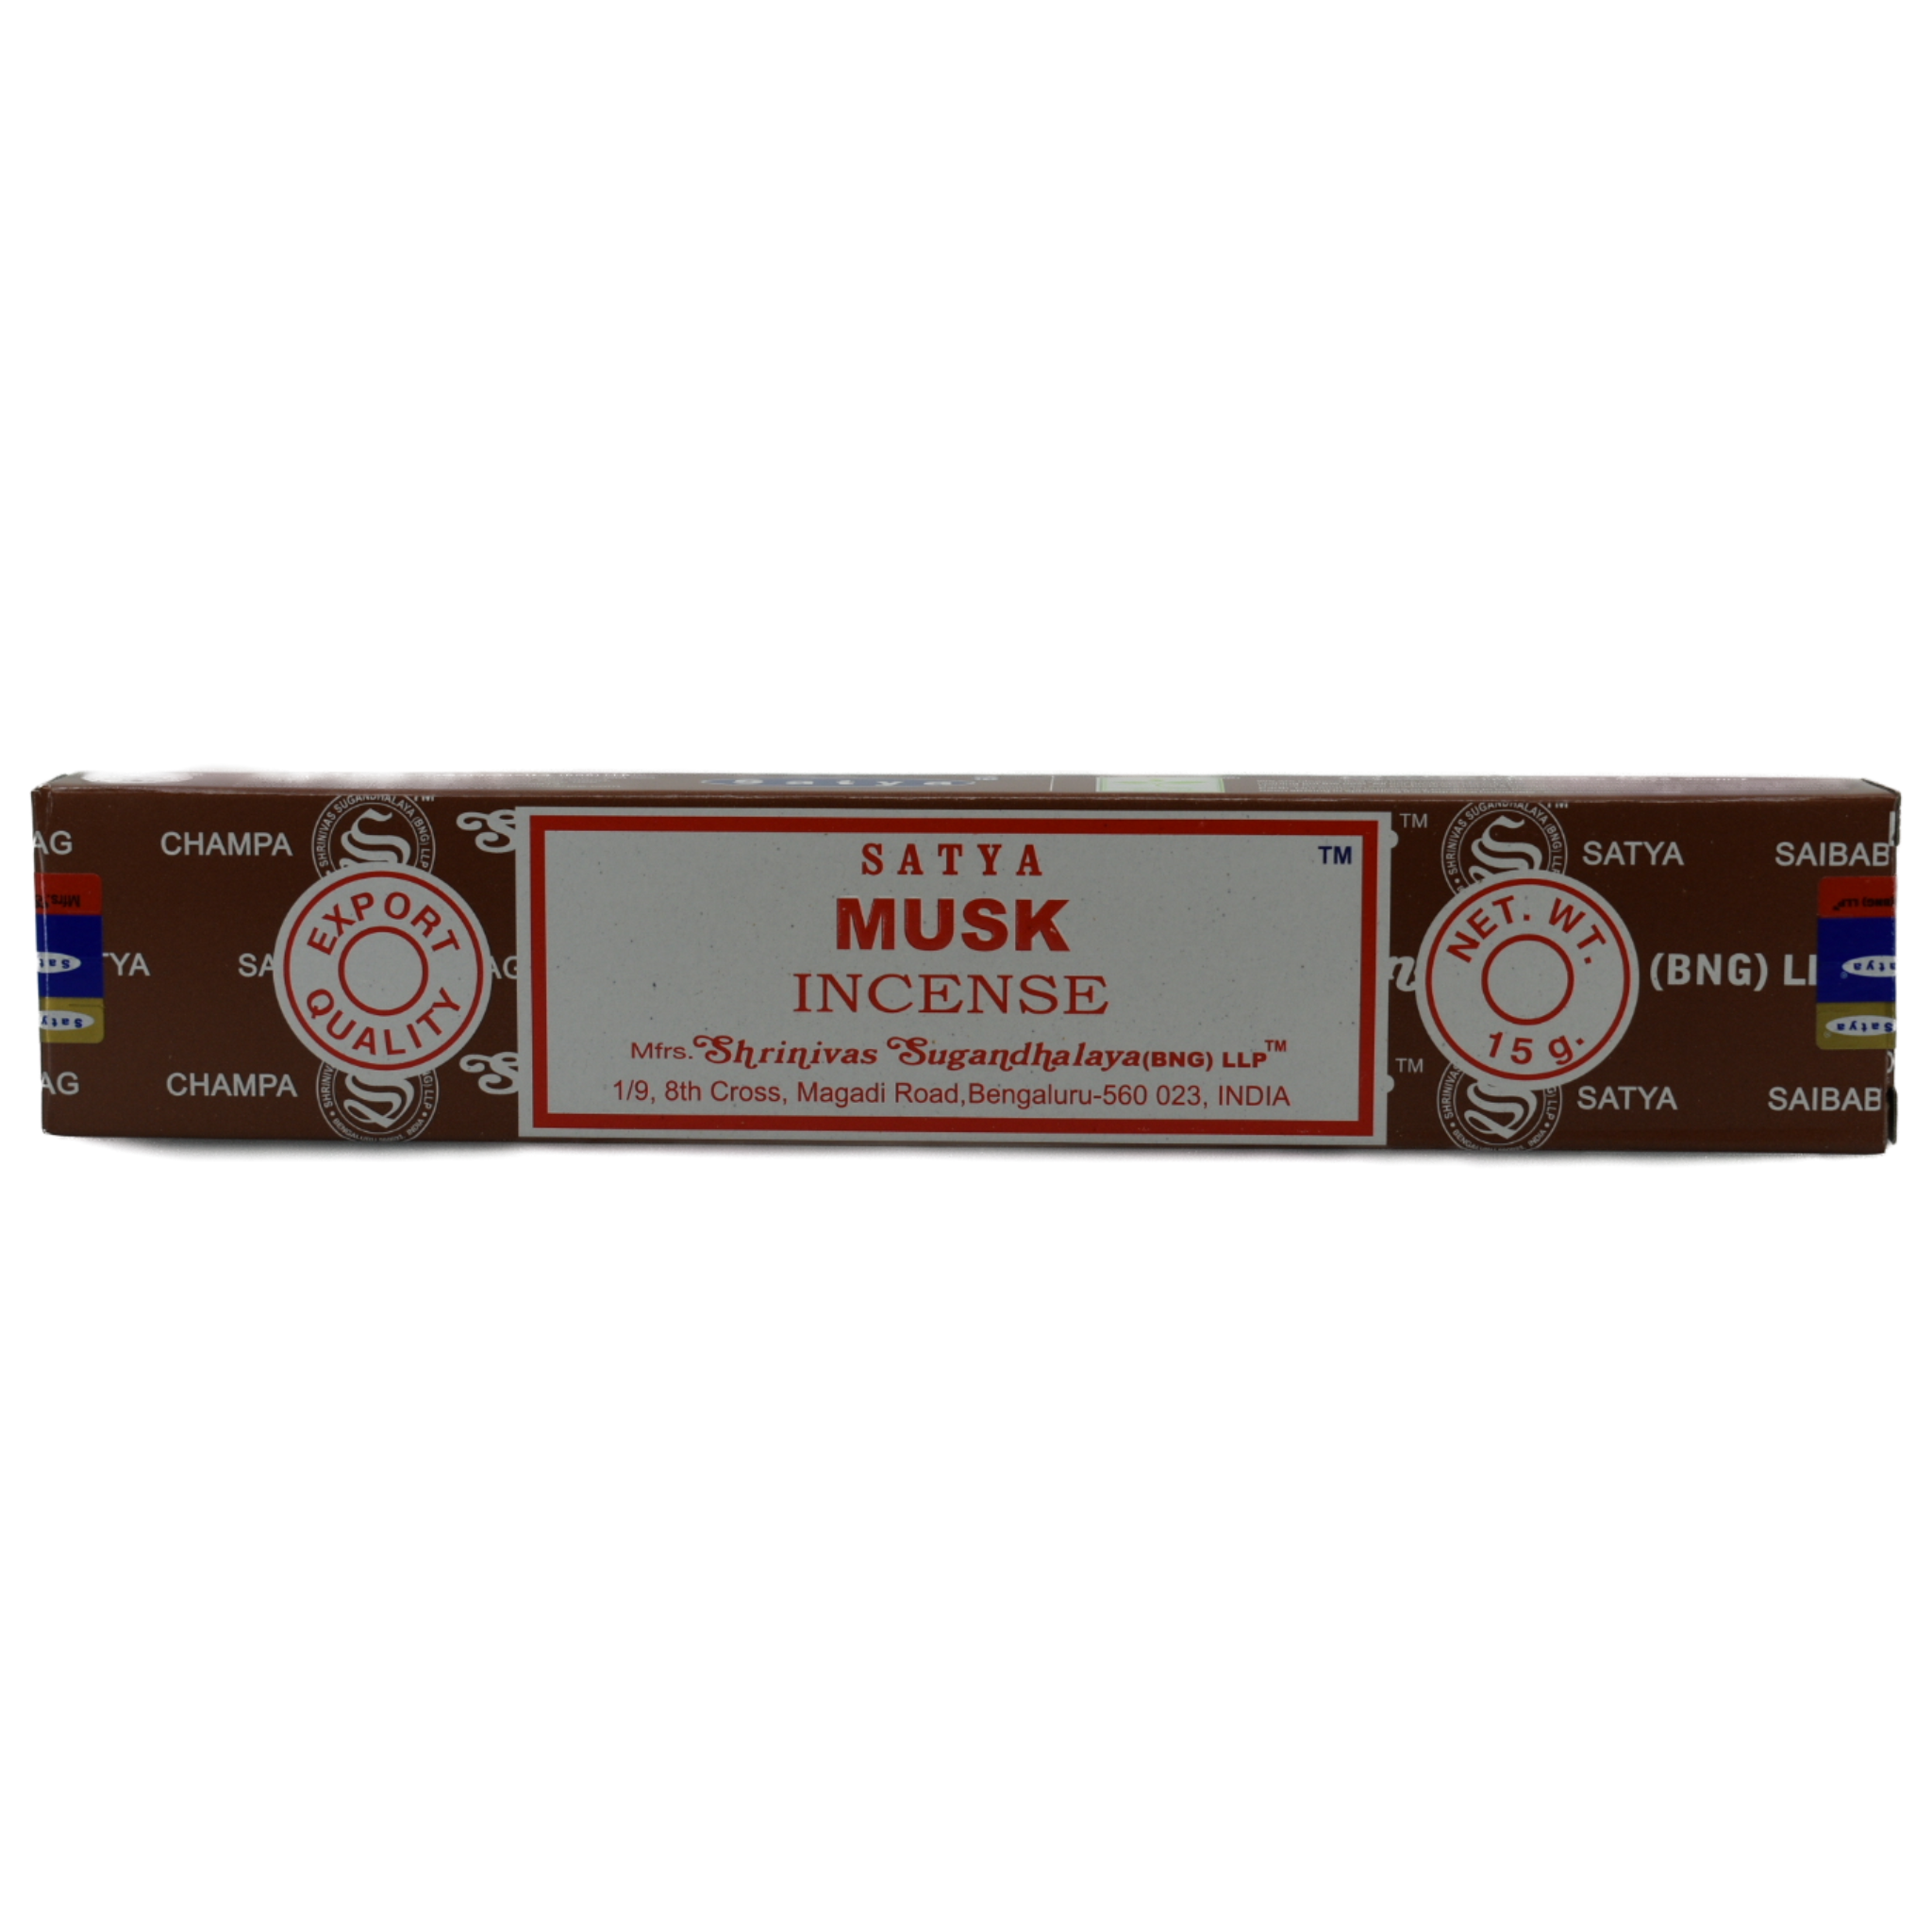 Musk Incense Sticks Back.  The back cover is a duplicate of the front cover.